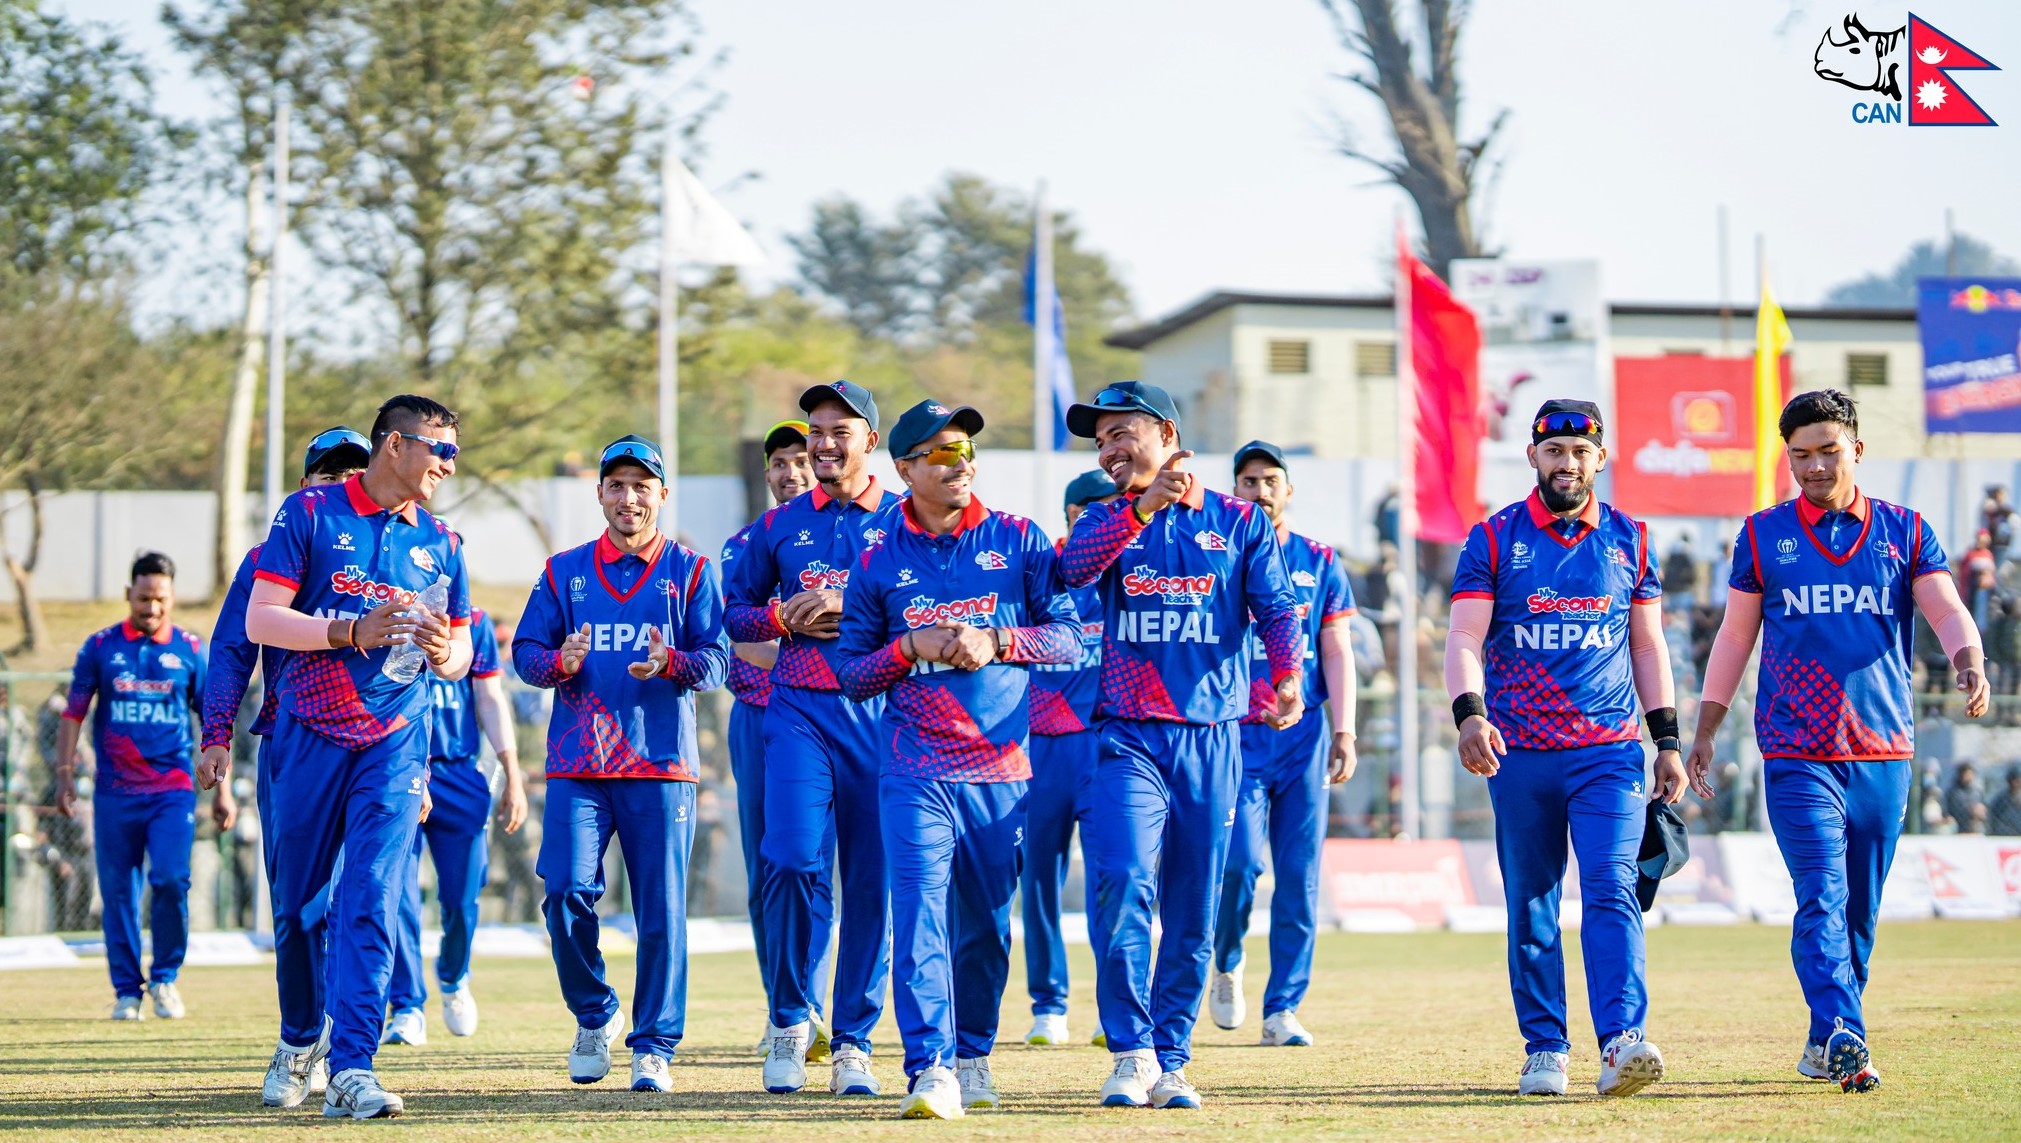 Nepal under pressure to beat Namibia to reach the final